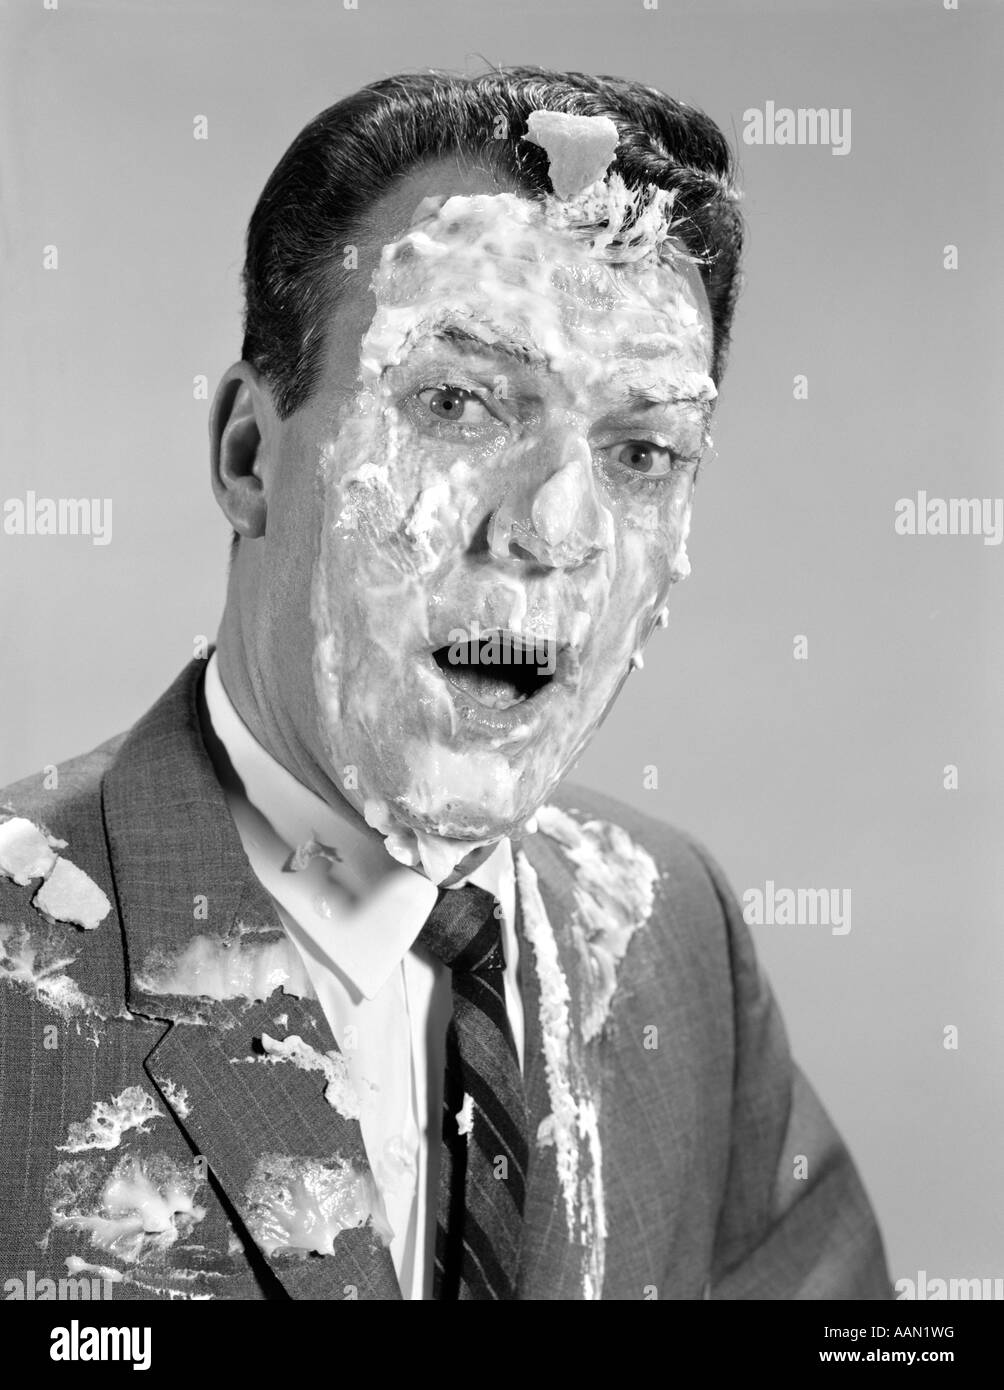 1960s MAN FACE SHOULDERS PIE IN THE FACE COVERED WITH MERINGUE SHAVING CREAM Stock Photo